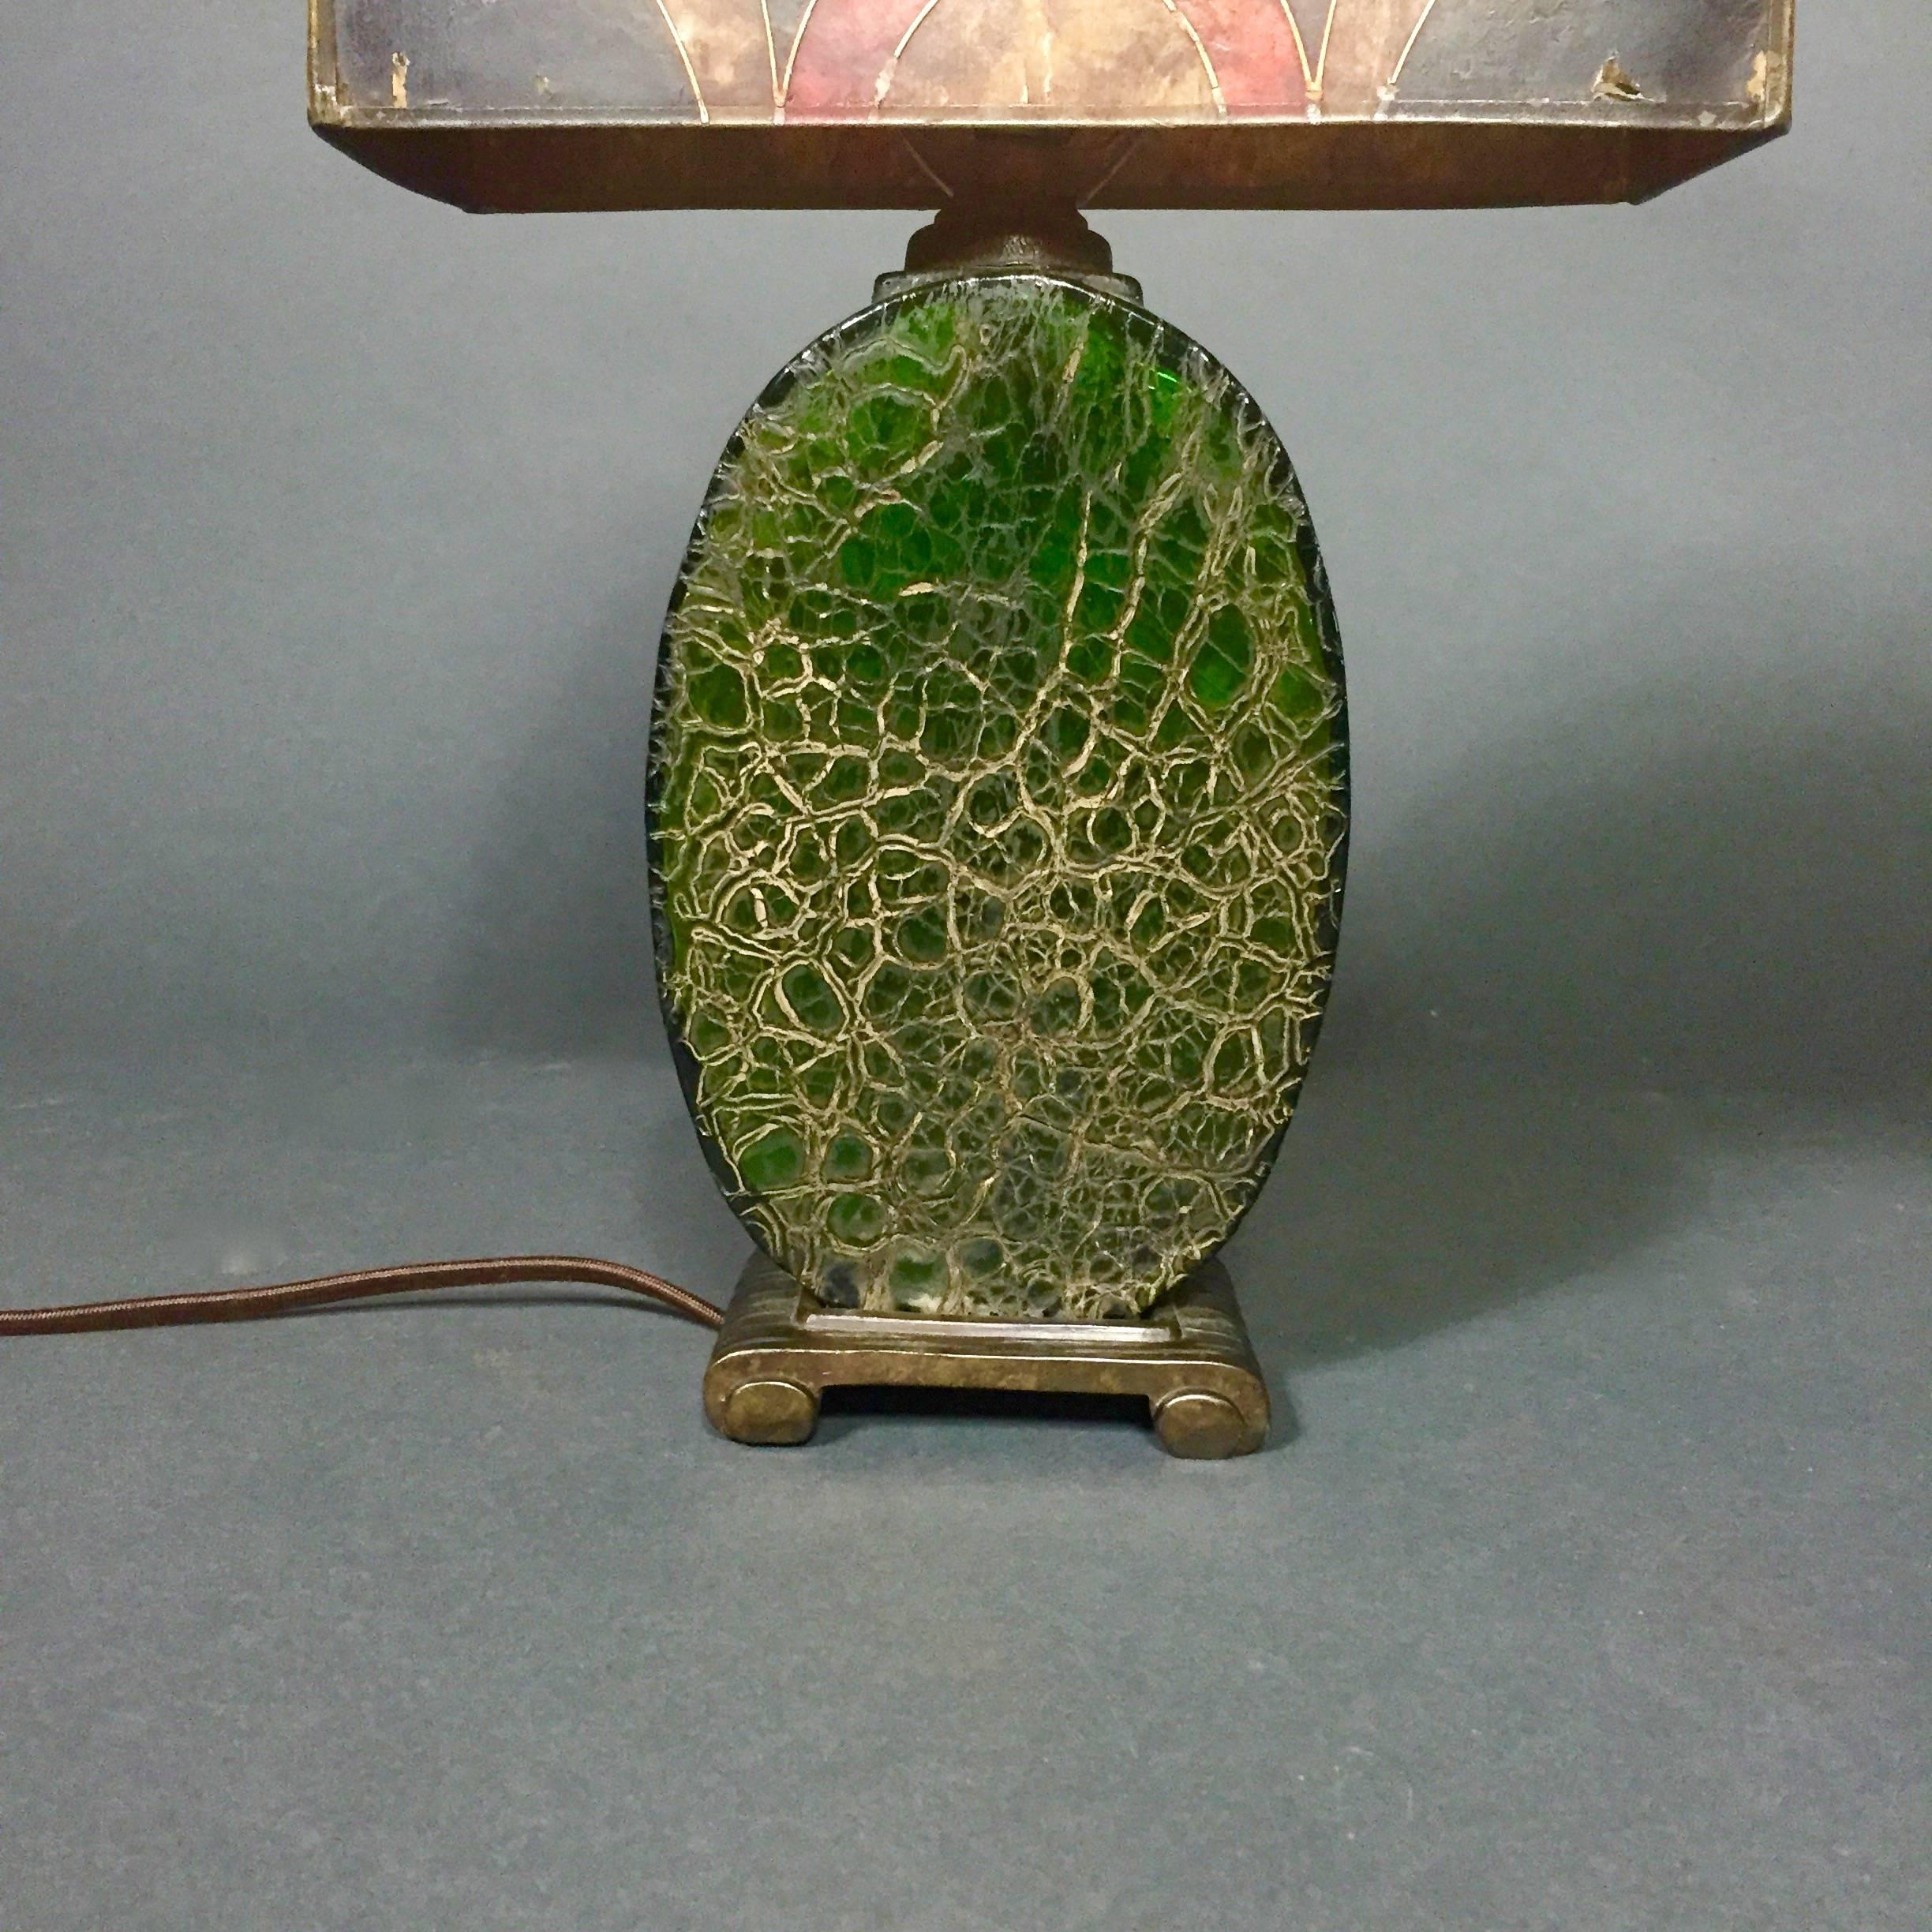 Molded Art Deco Table Lamp, Mica and Glass, France, 1920s